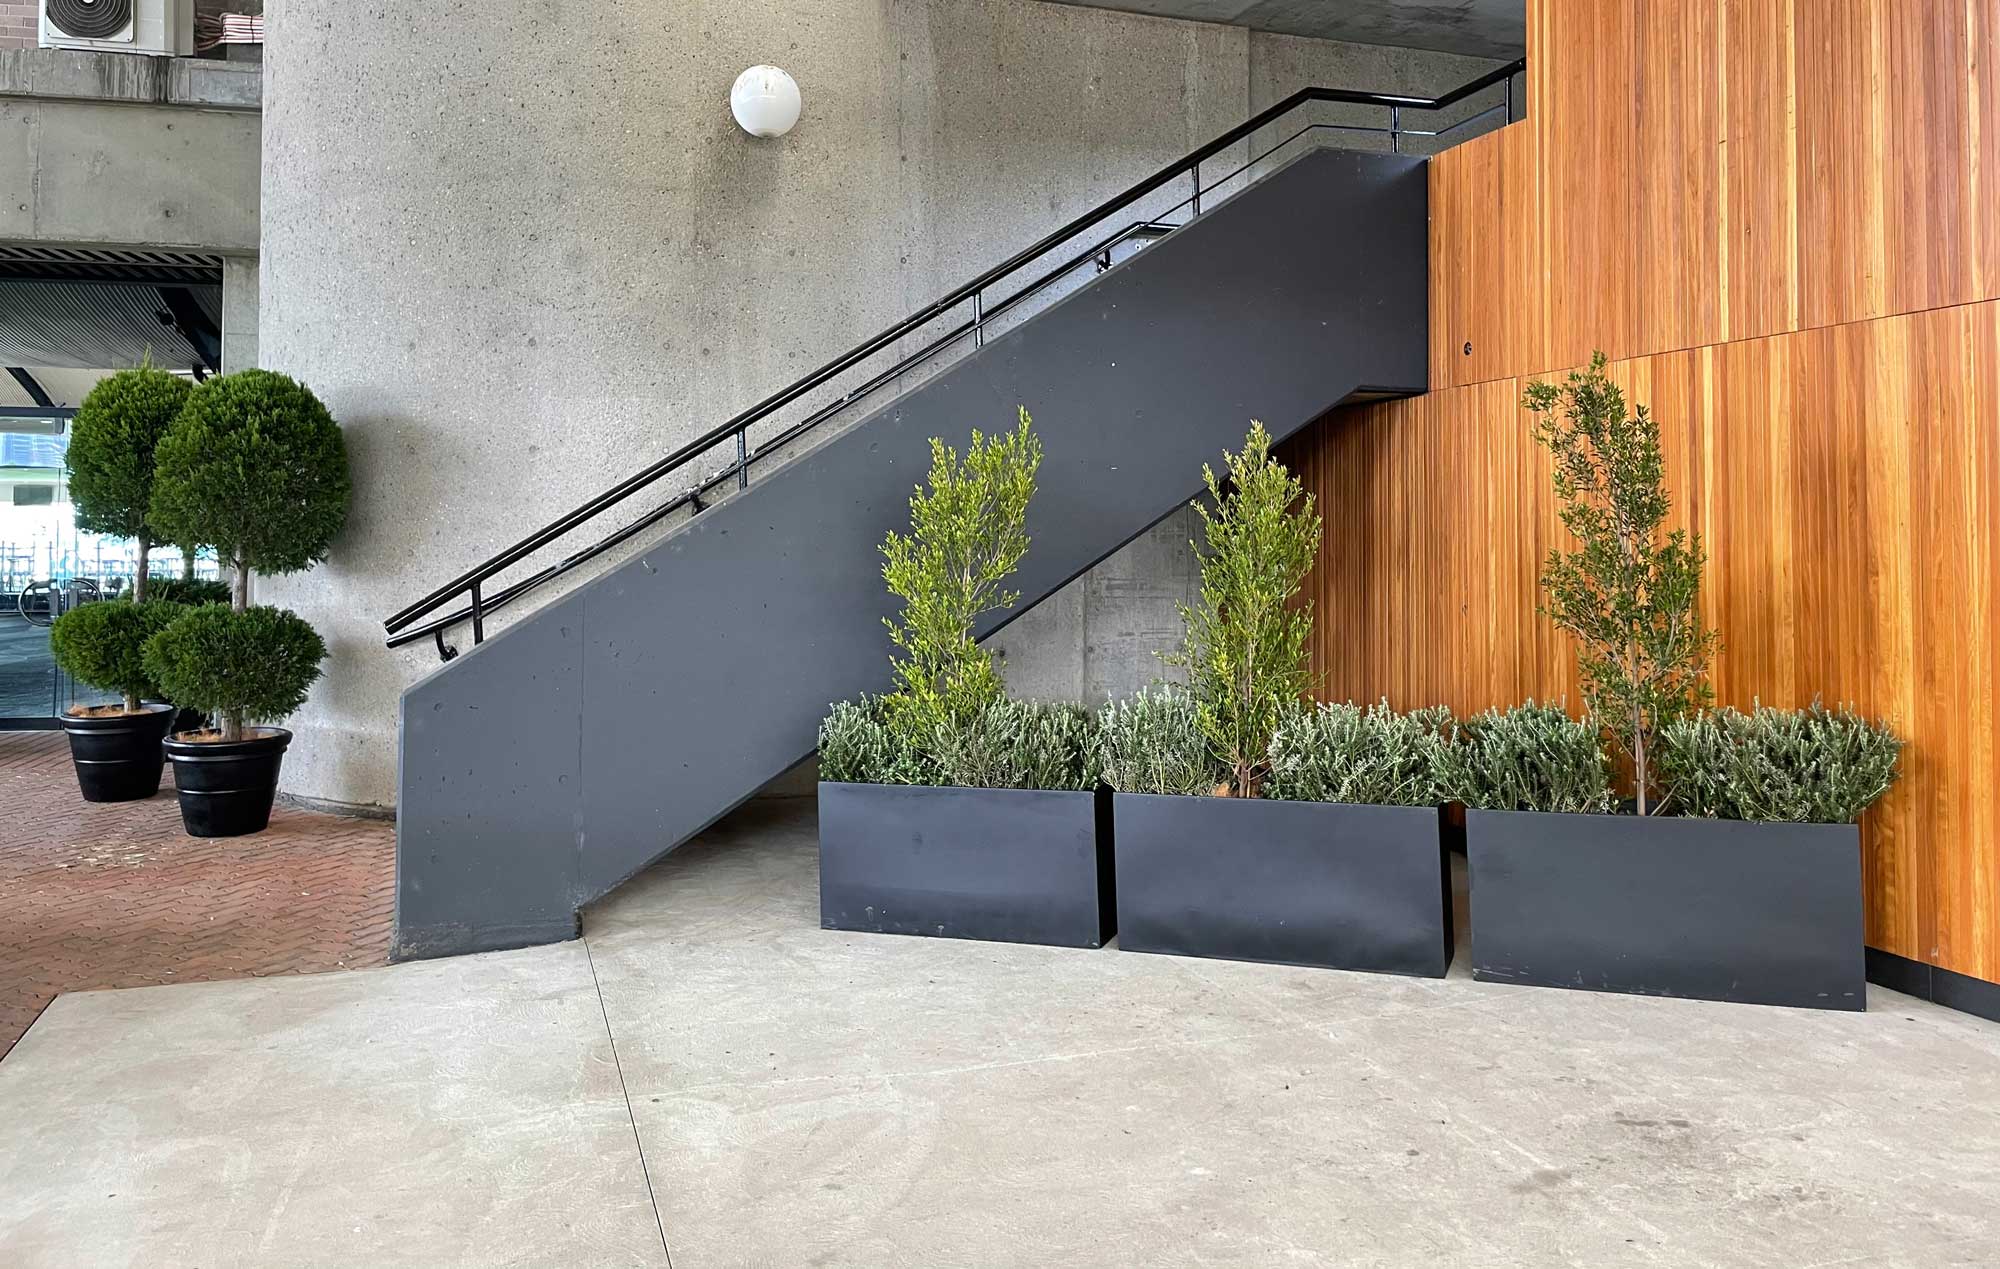 TPR Indoor plant hire near stairs